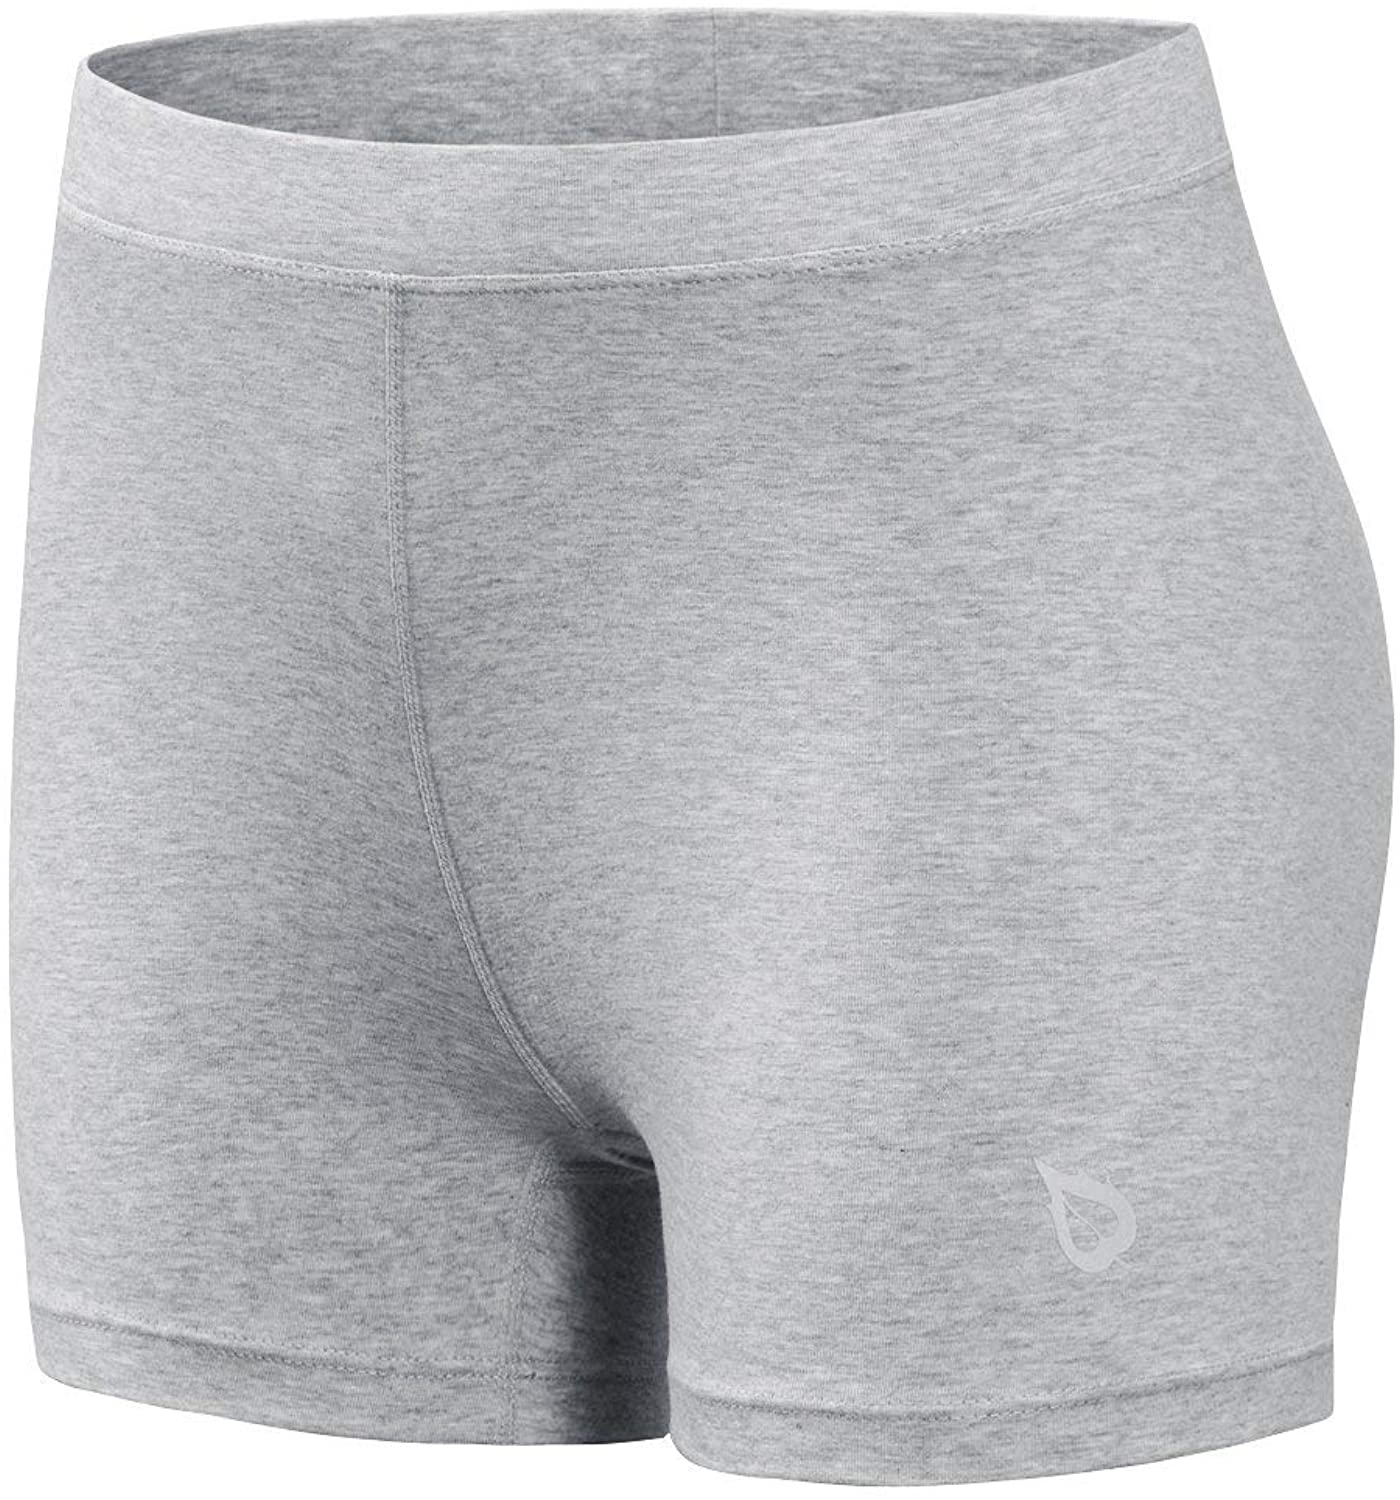 Baleaf Womens 3 Active Fitness Volleyball Shorts 